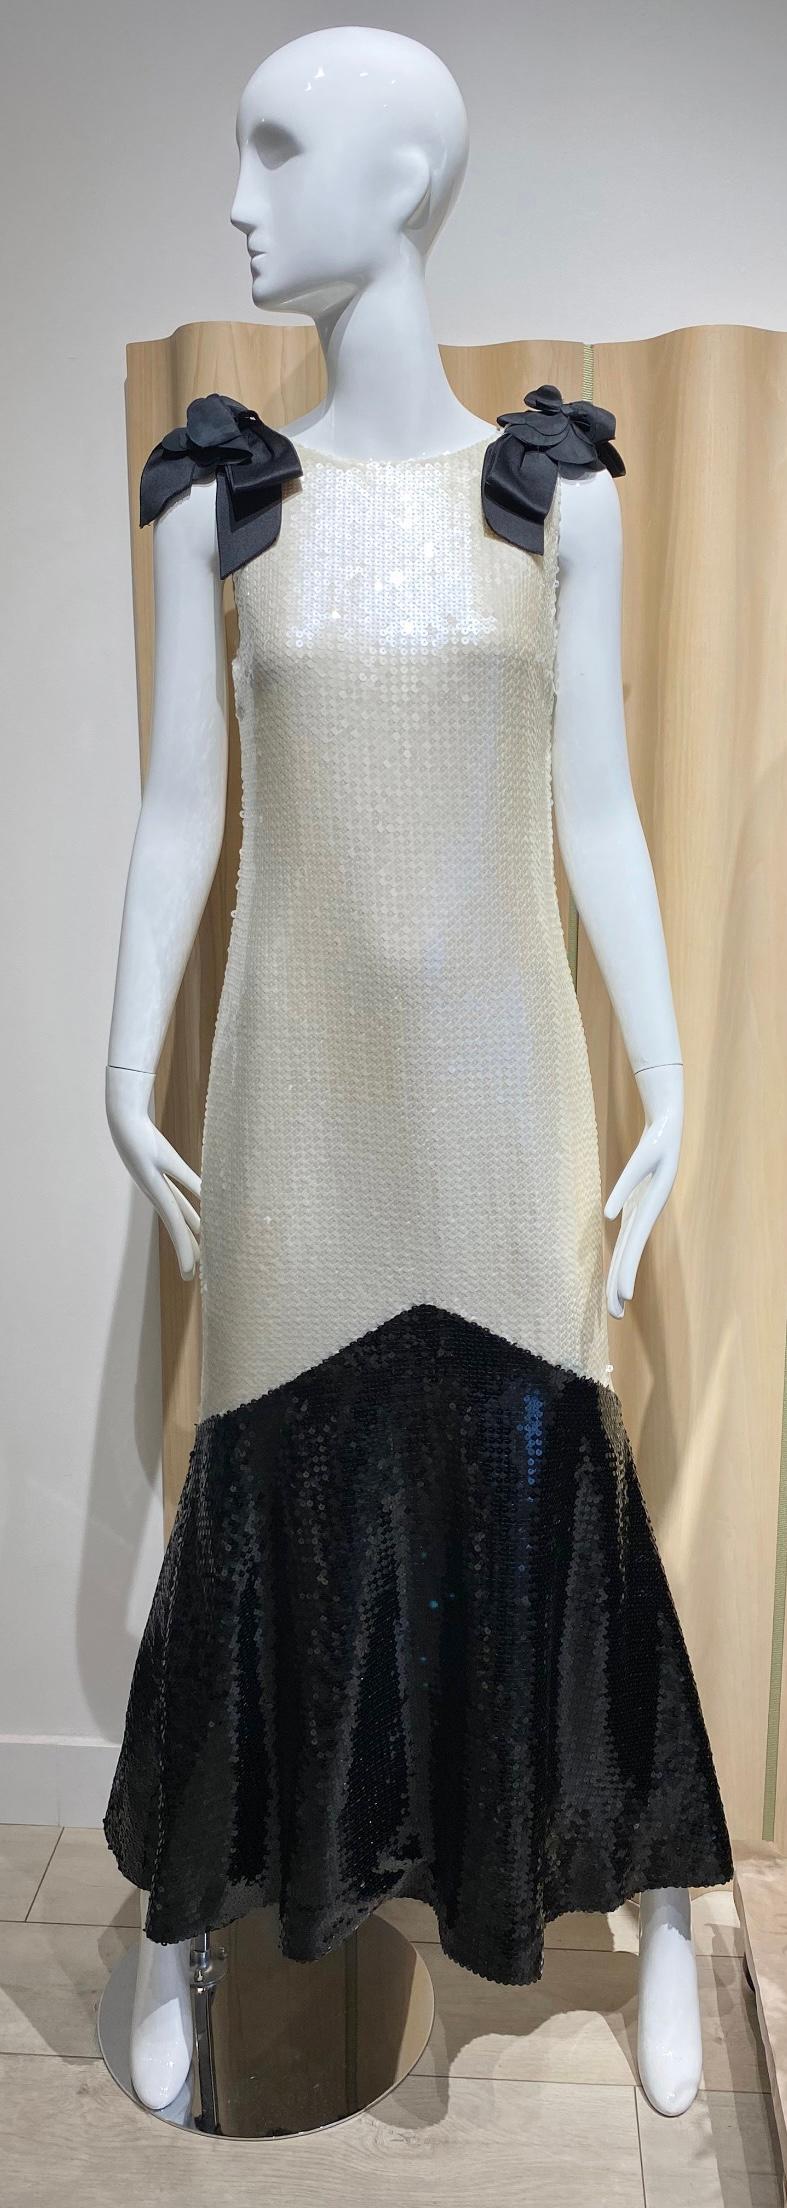 Vintage Chanel Silver and Black Sequin Dress with Bows 1